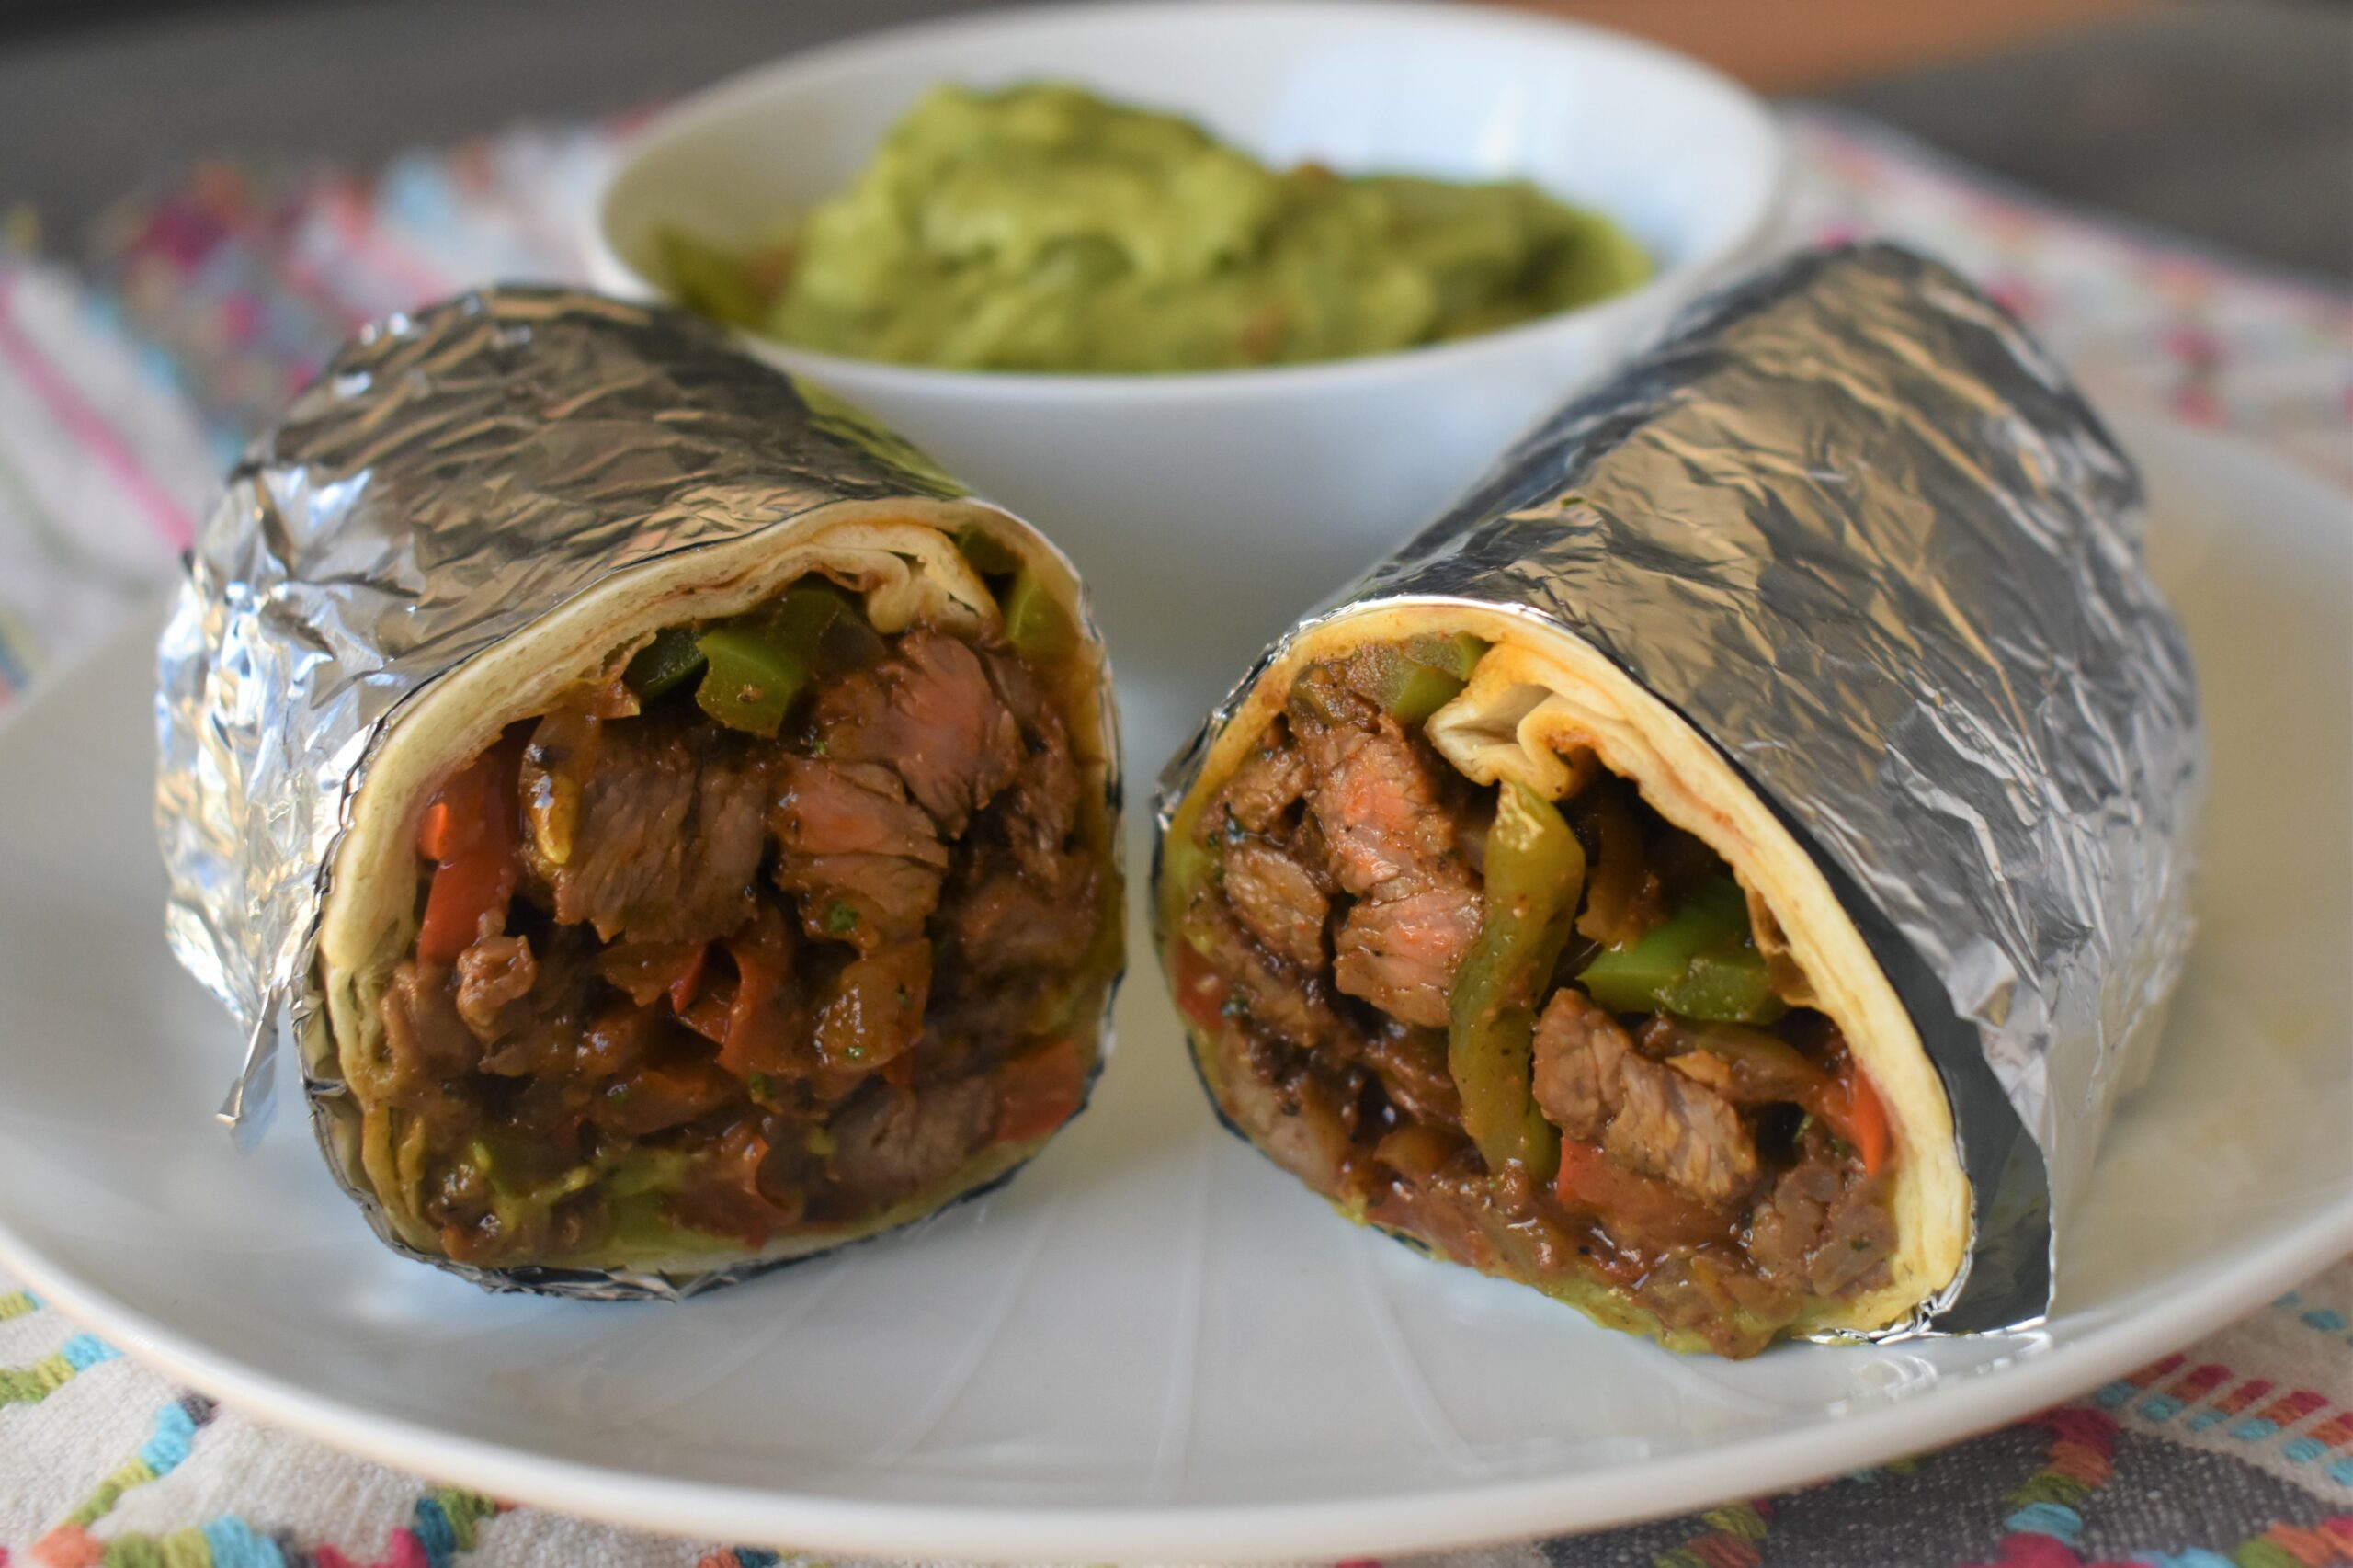 a plate with an albuquerquw burrito cut in half with a cup of guacamole